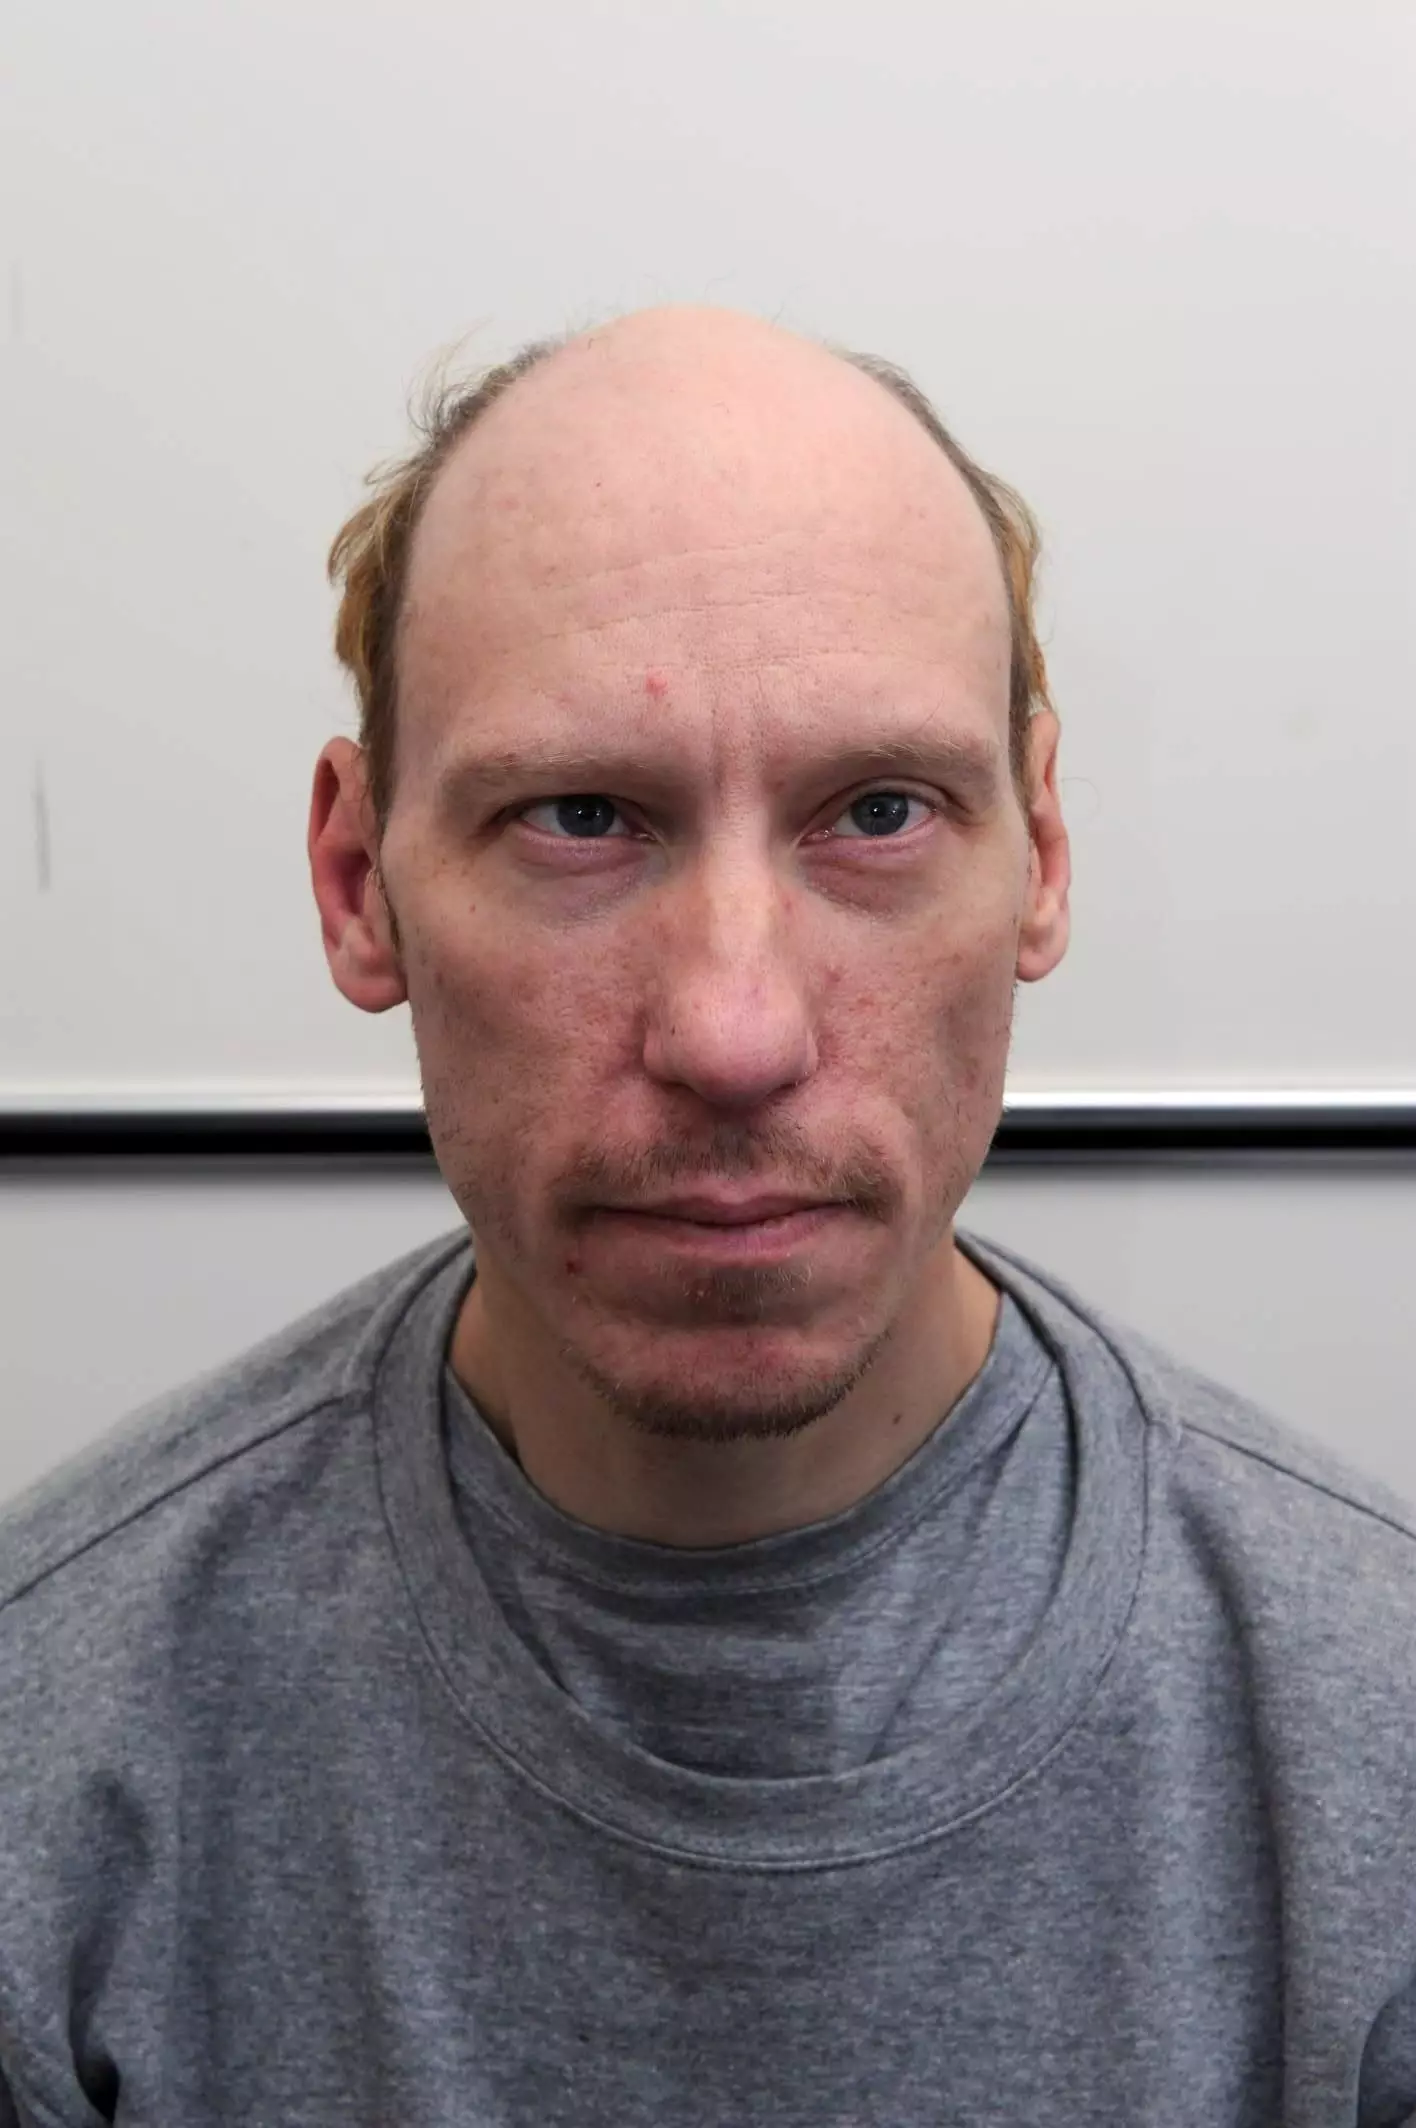 Date rape murderer Stephen Port used GHB to drug his victims.